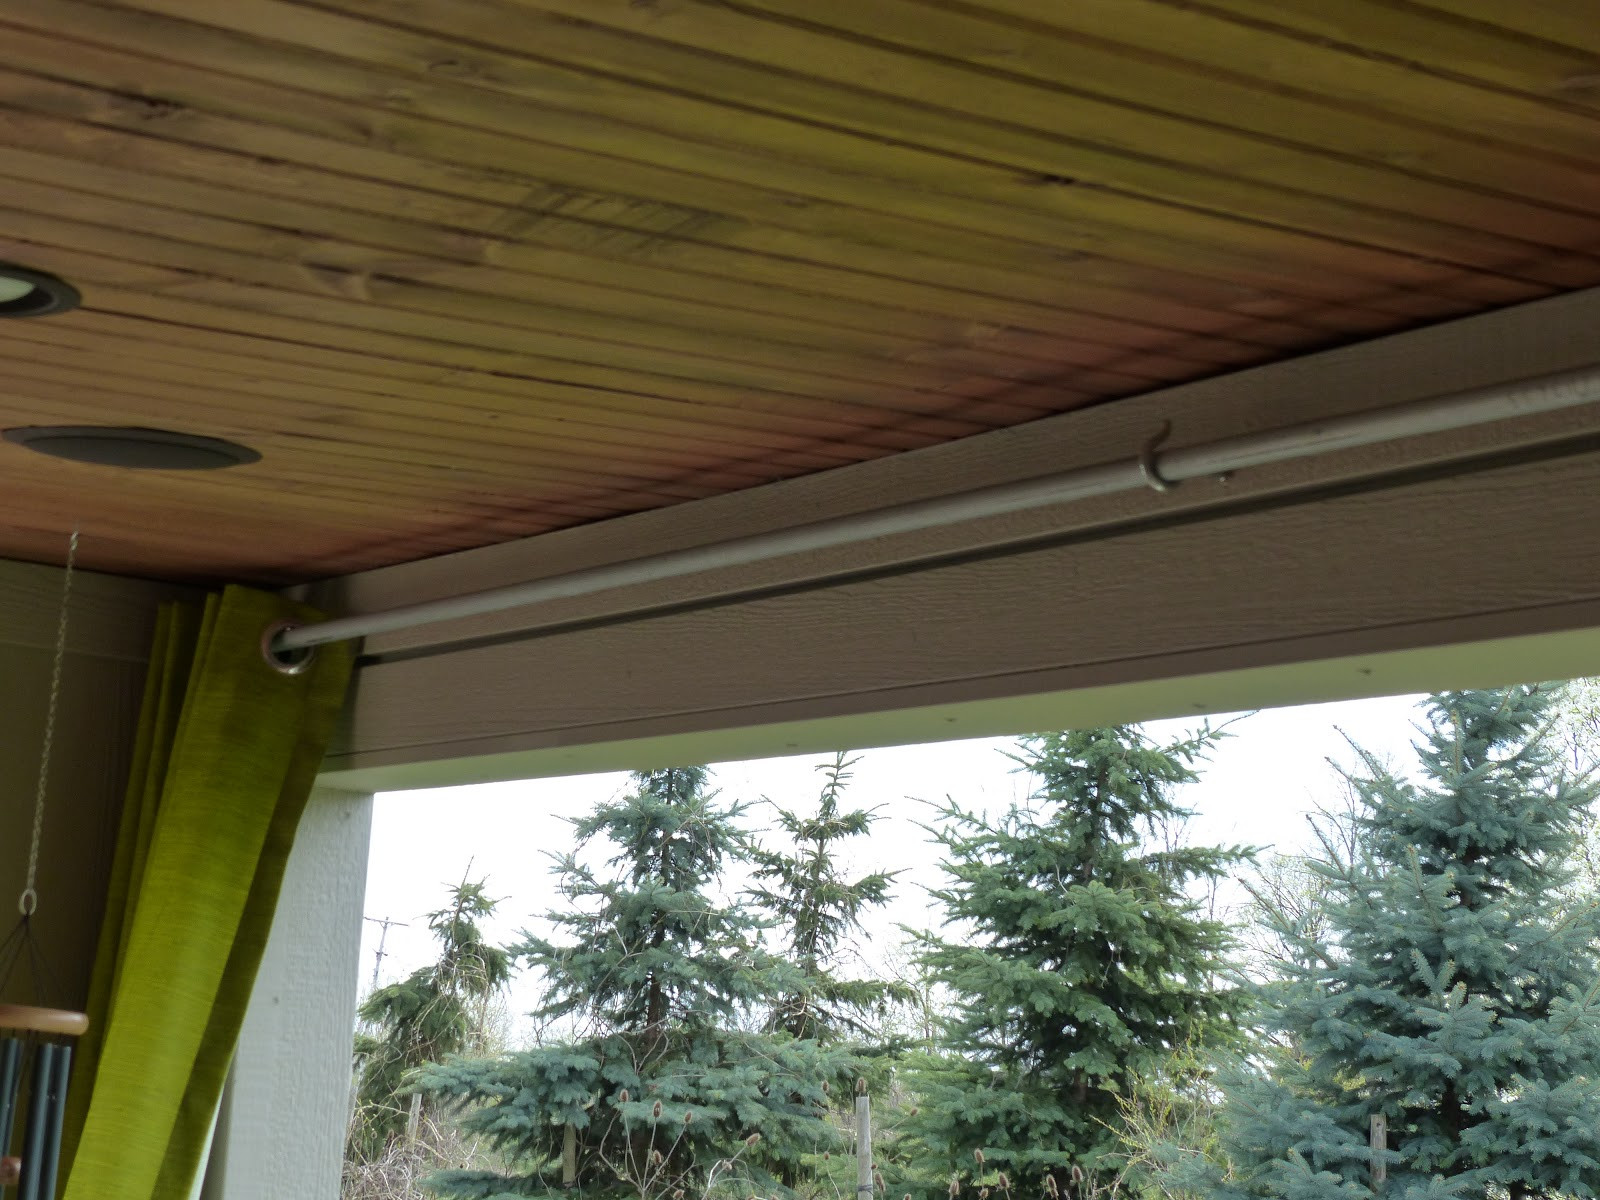 DIY Outdoor Curtain Rods
 JULIE PETERSON Simple Redesign DIY BUDGET OUTDOOR